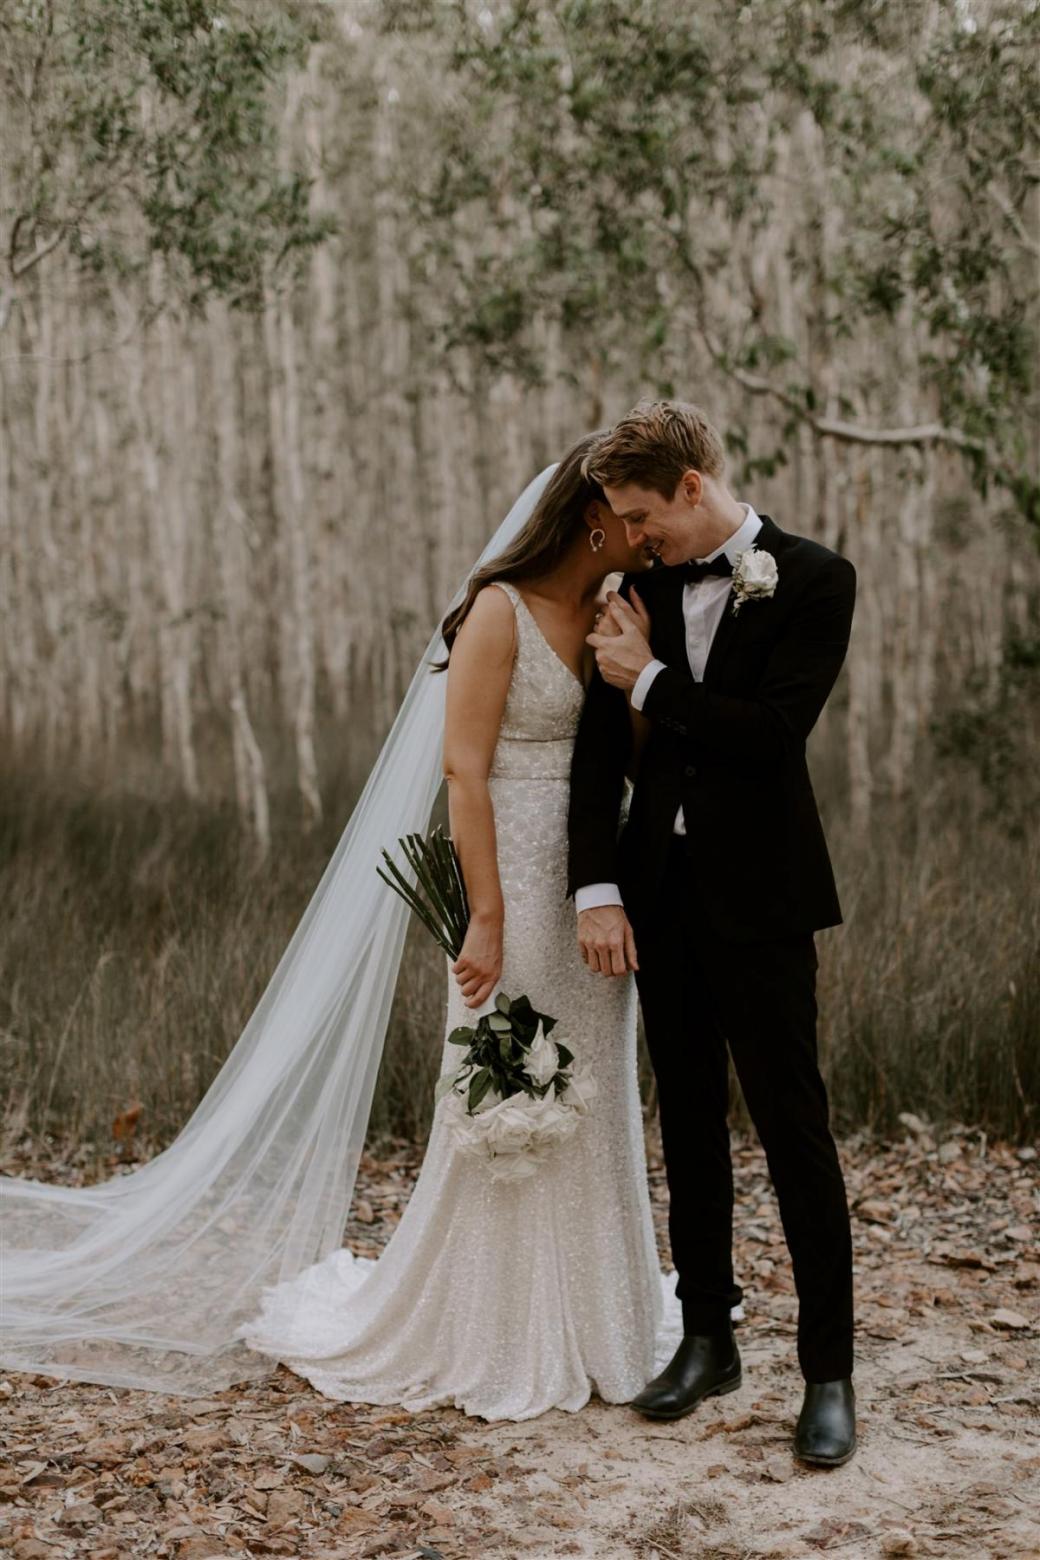 KWH bride Jemma and Sam at their Sunshine Coast Wedding; Jemma wears the GEORGINA gown by Karen Willis Holmes; a floral beaded Luxe wedding dress with a V-neck and bias cut skirt